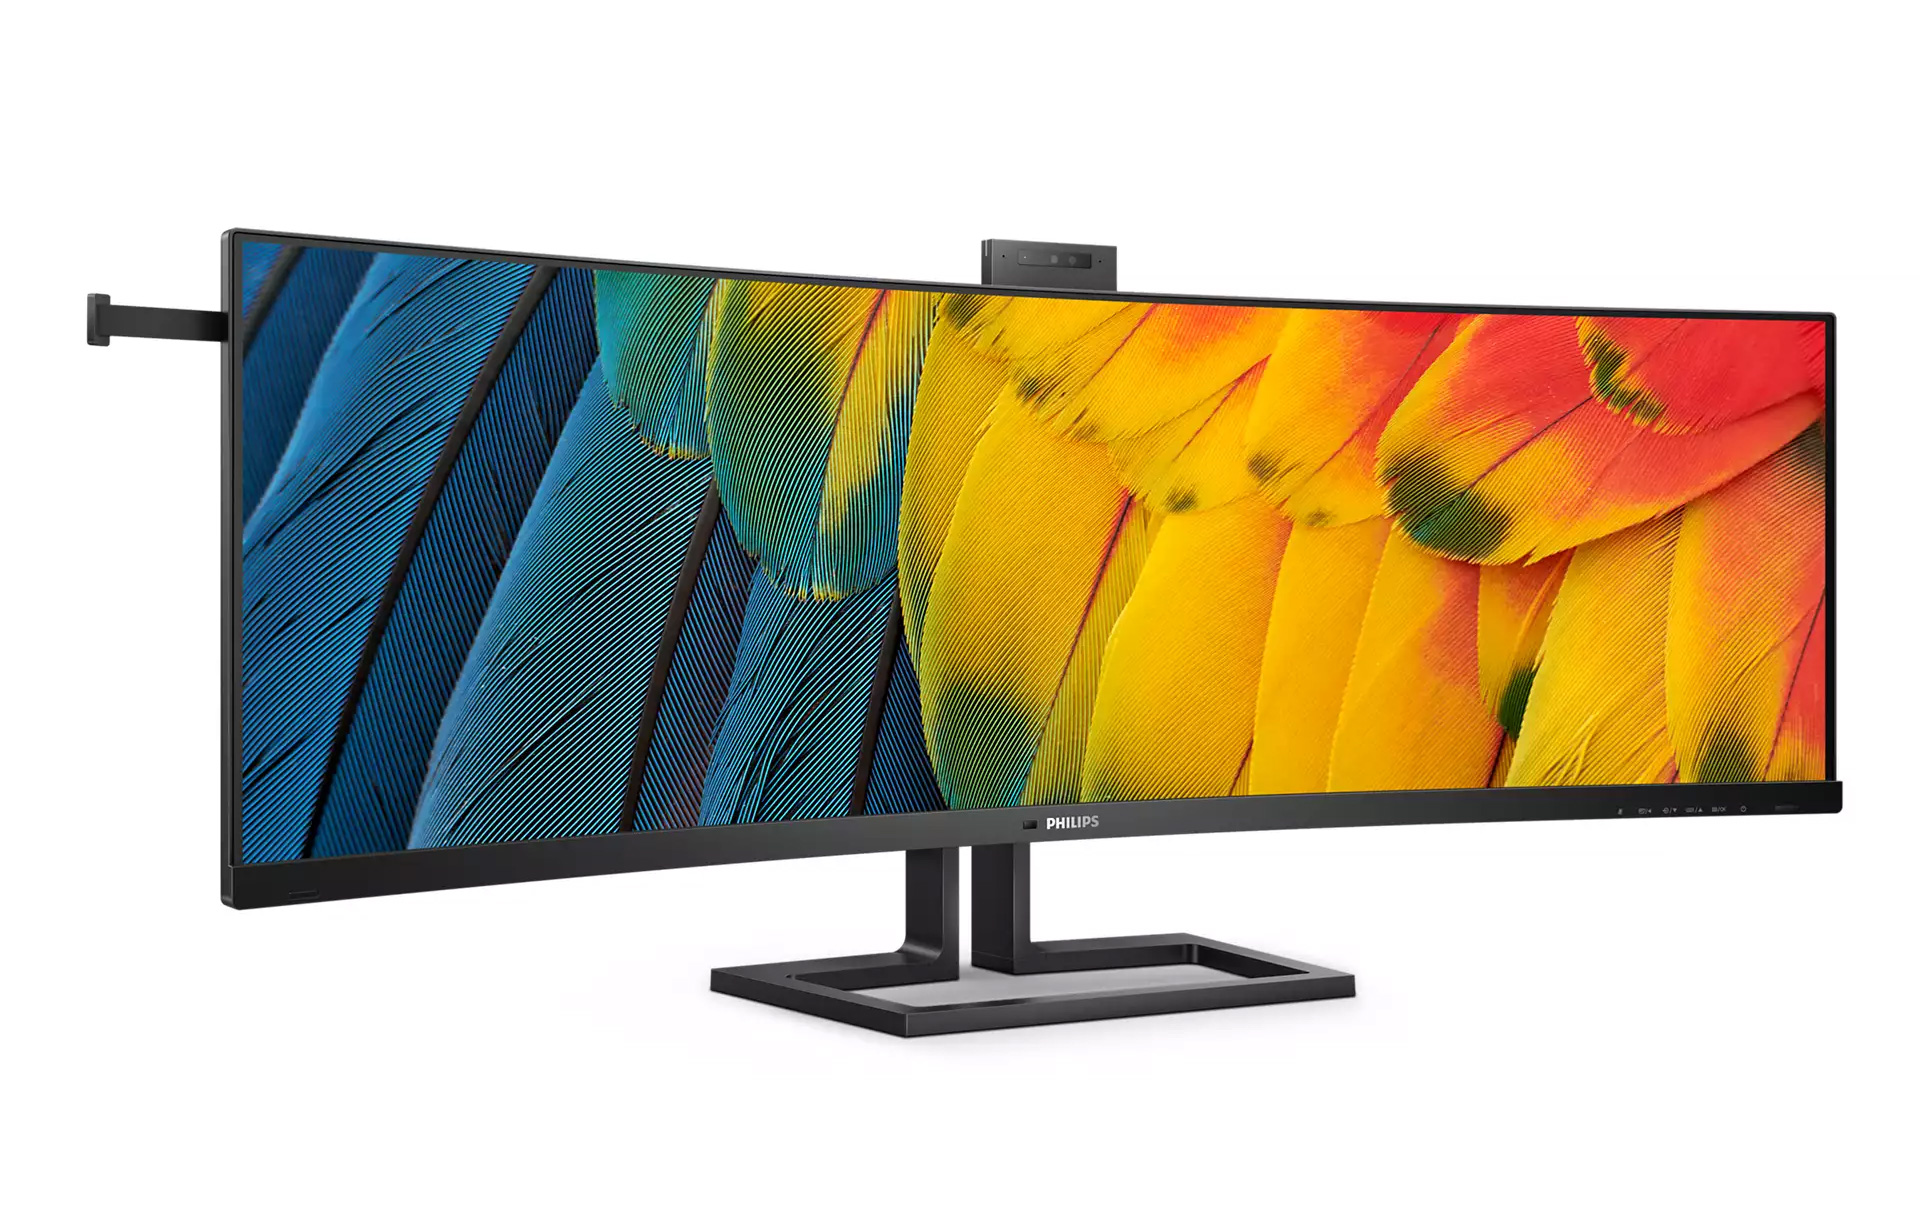 beu overloop parallel Philips reveals 45-inch ultra-wide monitors with KVM switches and USB  Type-C ports - NotebookCheck.net News